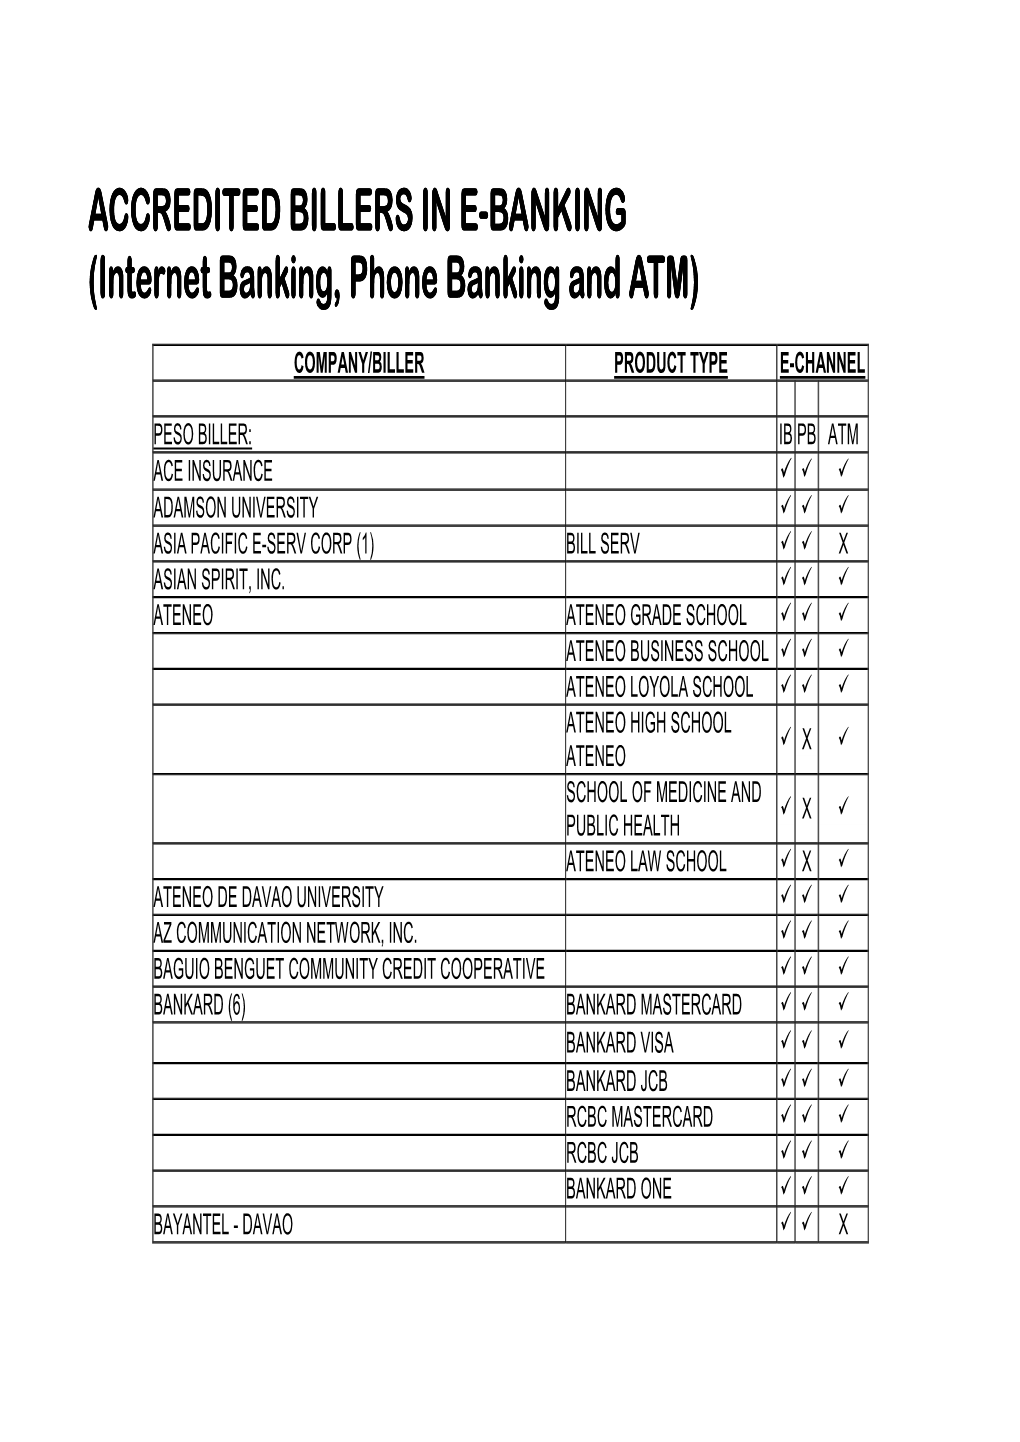 Internet Banking, Phone Banking and ATM)